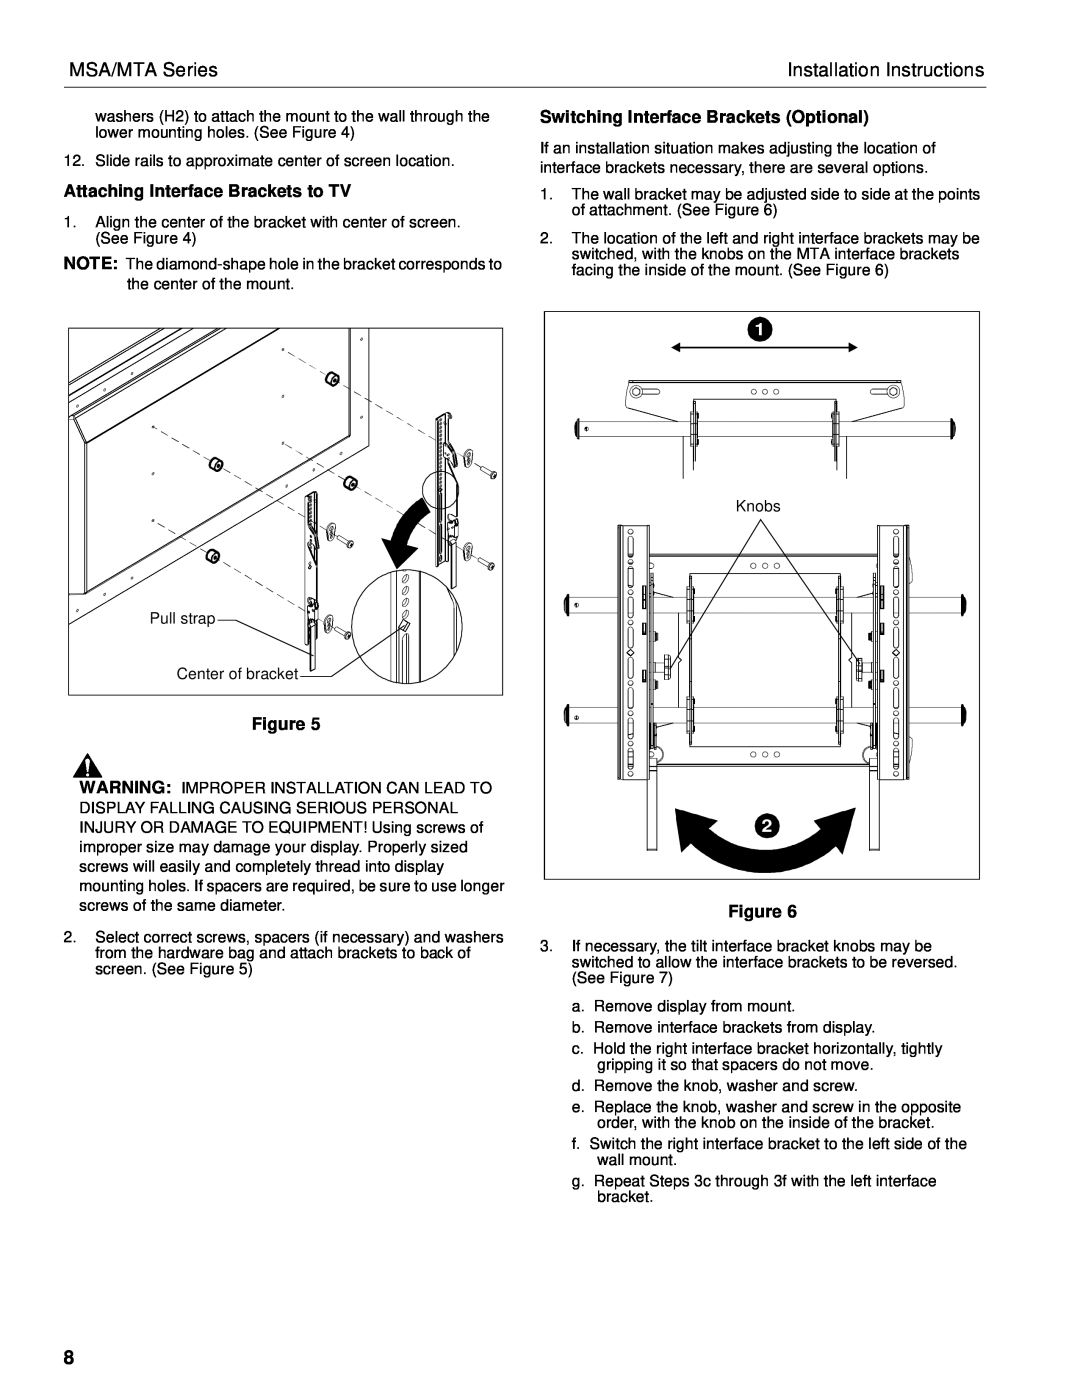 Chief Manufacturing Attaching Interface Brackets to TV, Switching Interface Brackets Optional, MSA/MTA Series 